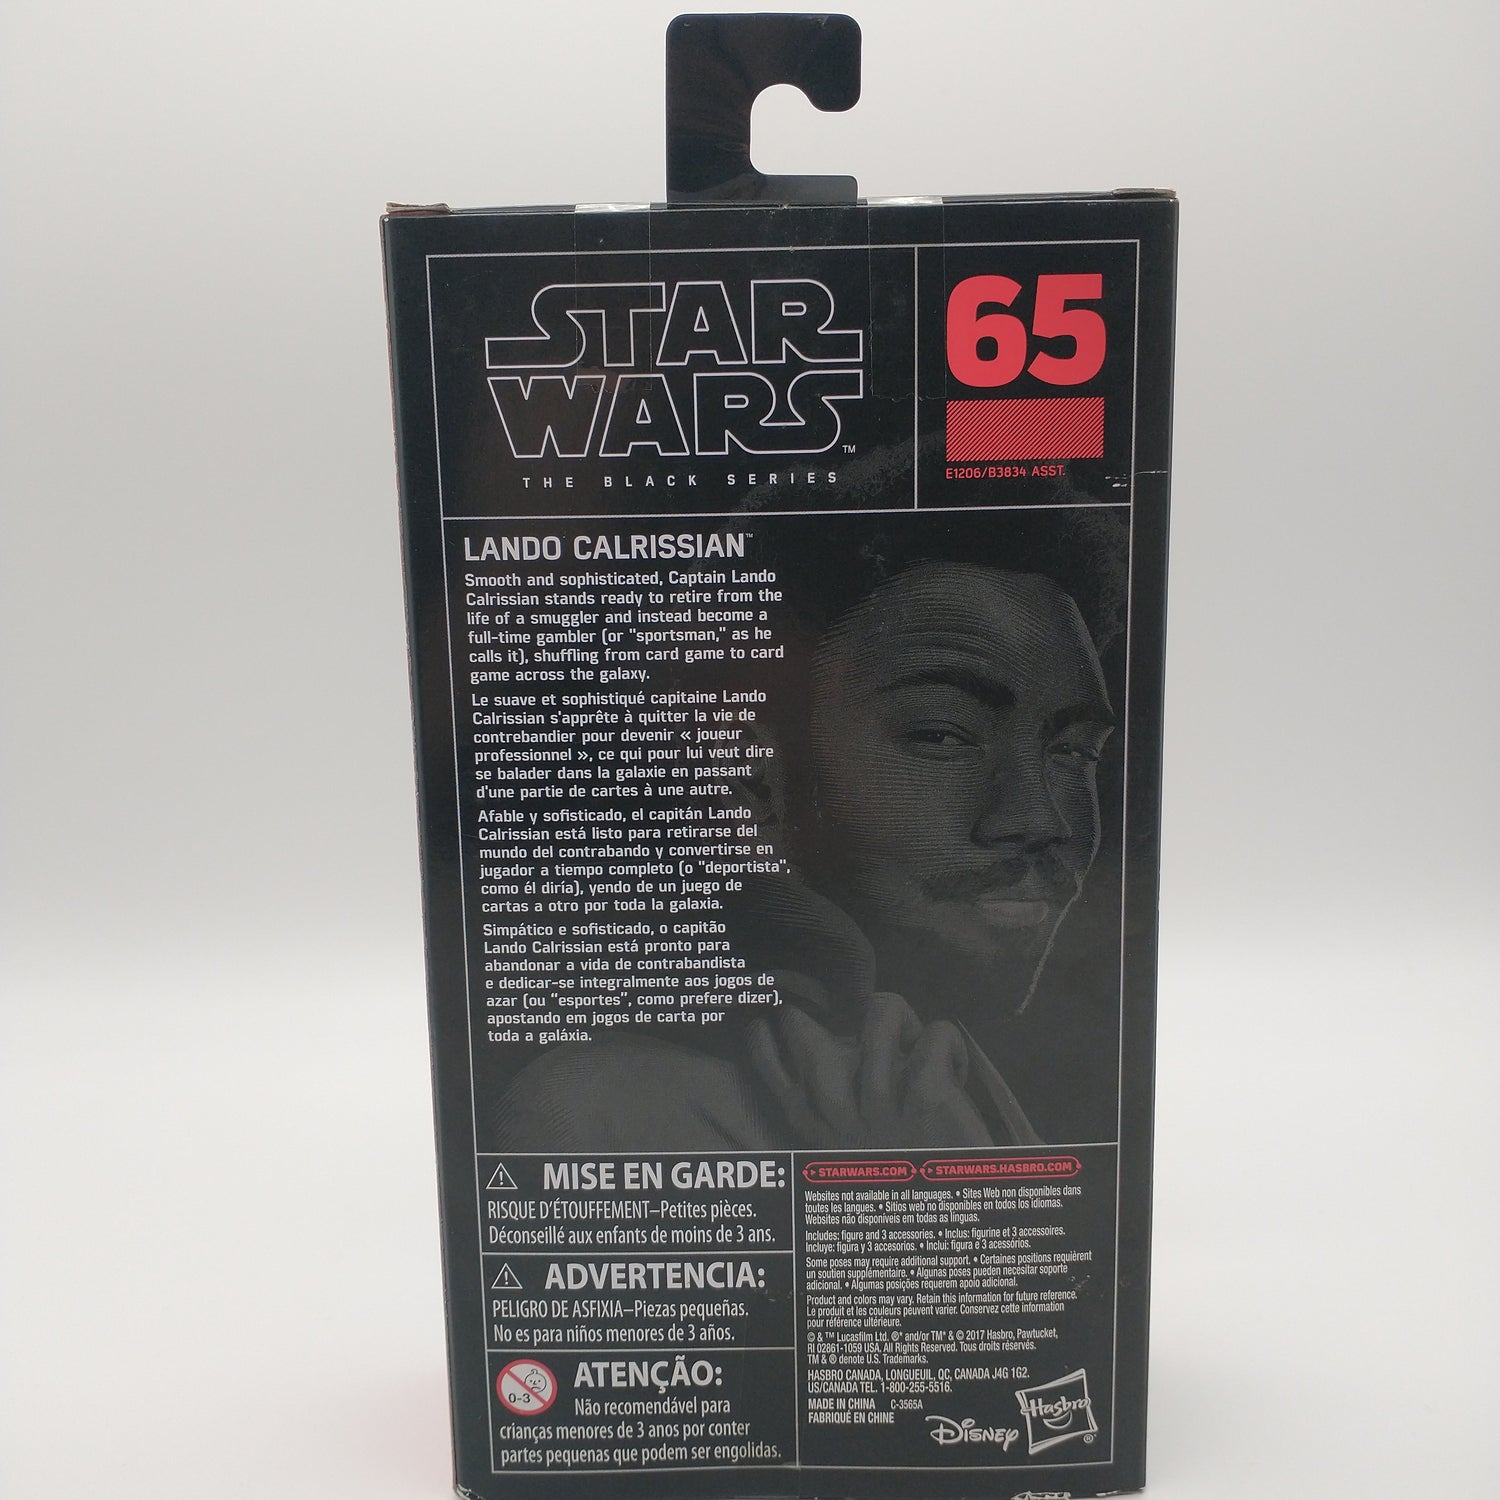 The back of the cart featuring images of the action figure and a summary of information about them. It is illegible in the picture.